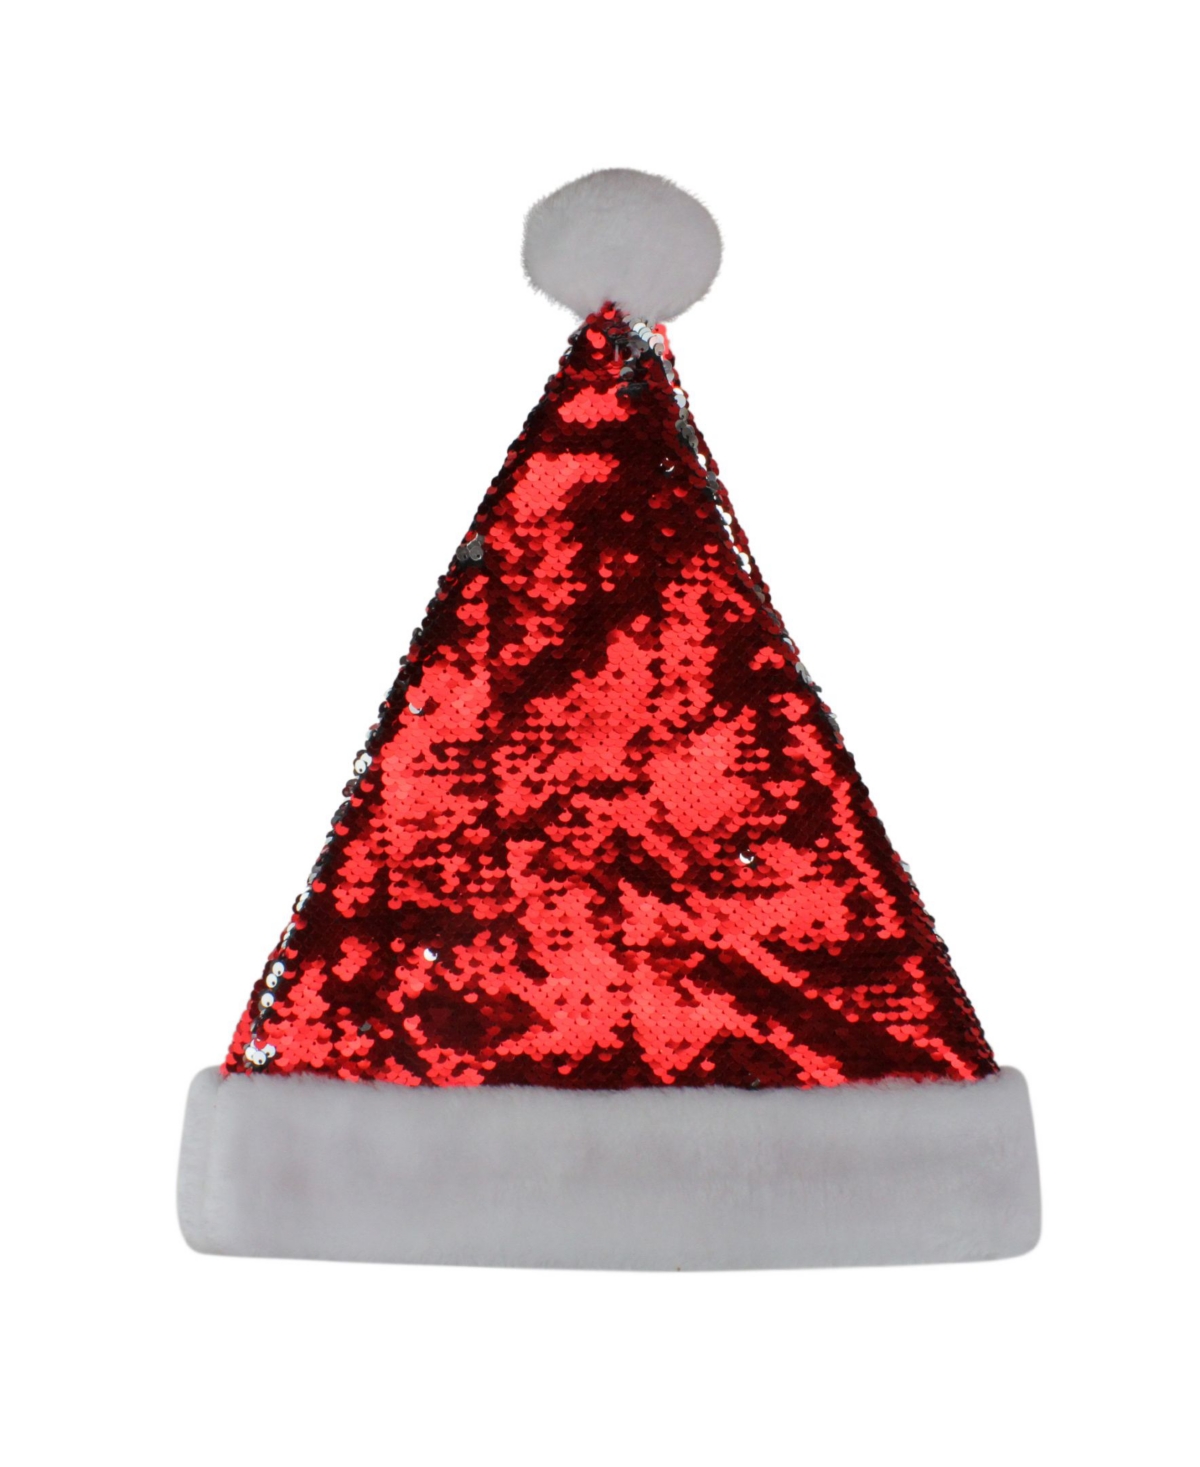 Reversible Sequined Christmas Santa Hat with Faux Fur Cuff - Red